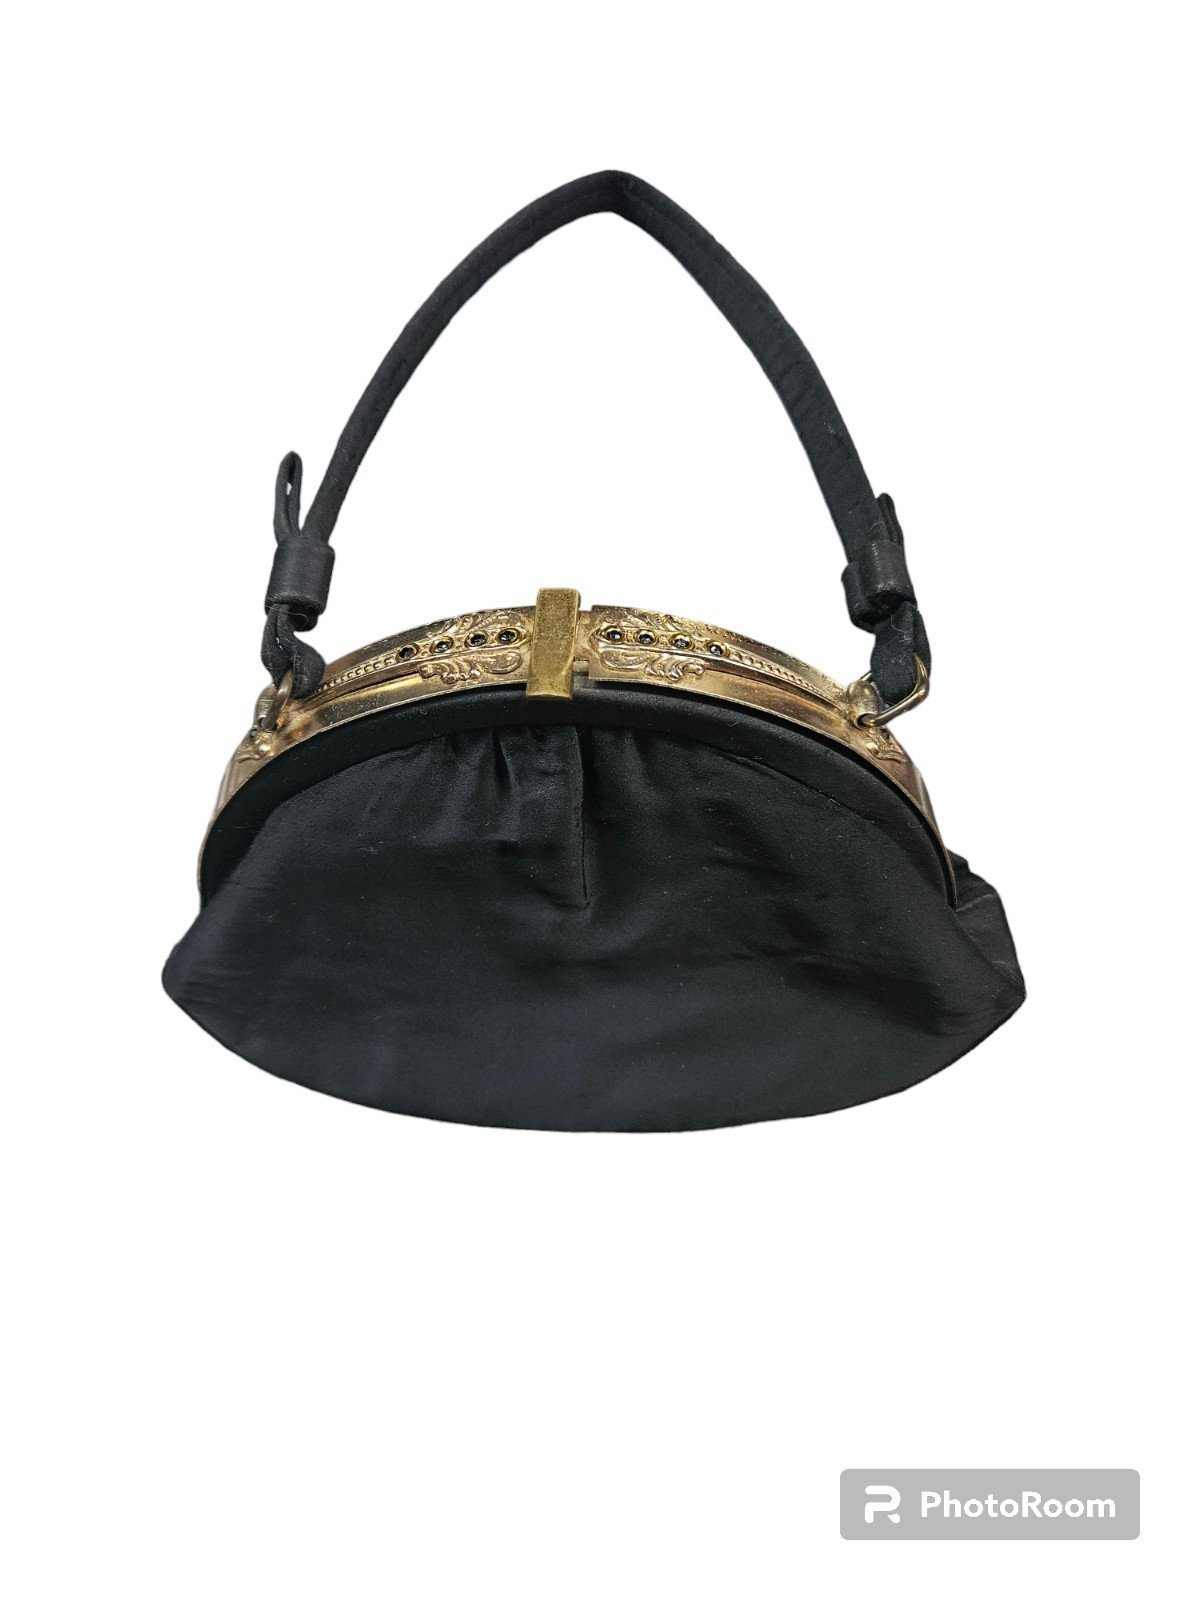 Vintage After 5 Evening Bag Black and Gold w/ Accessori